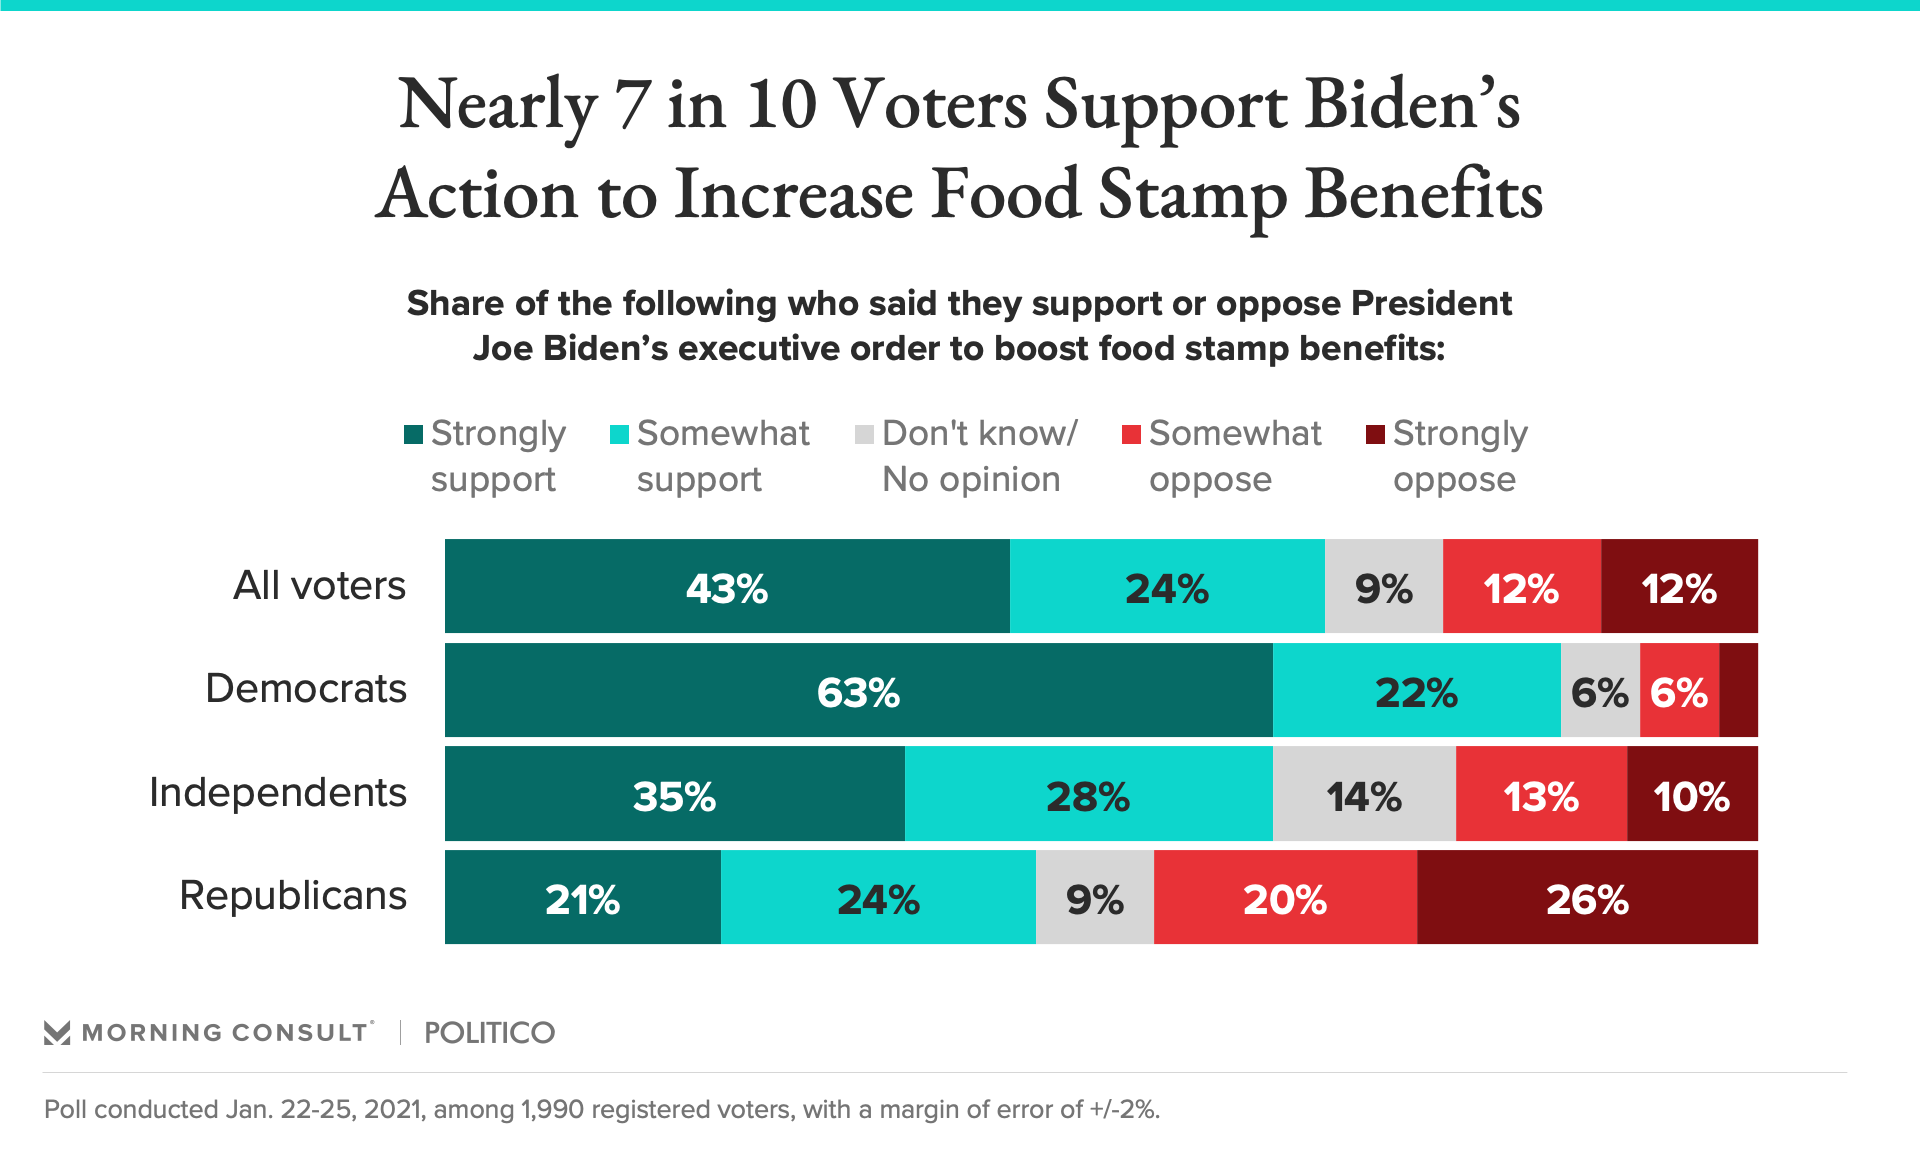 Biden’s Executive Order on Boosting Food Stamp Benefits Is Backed by